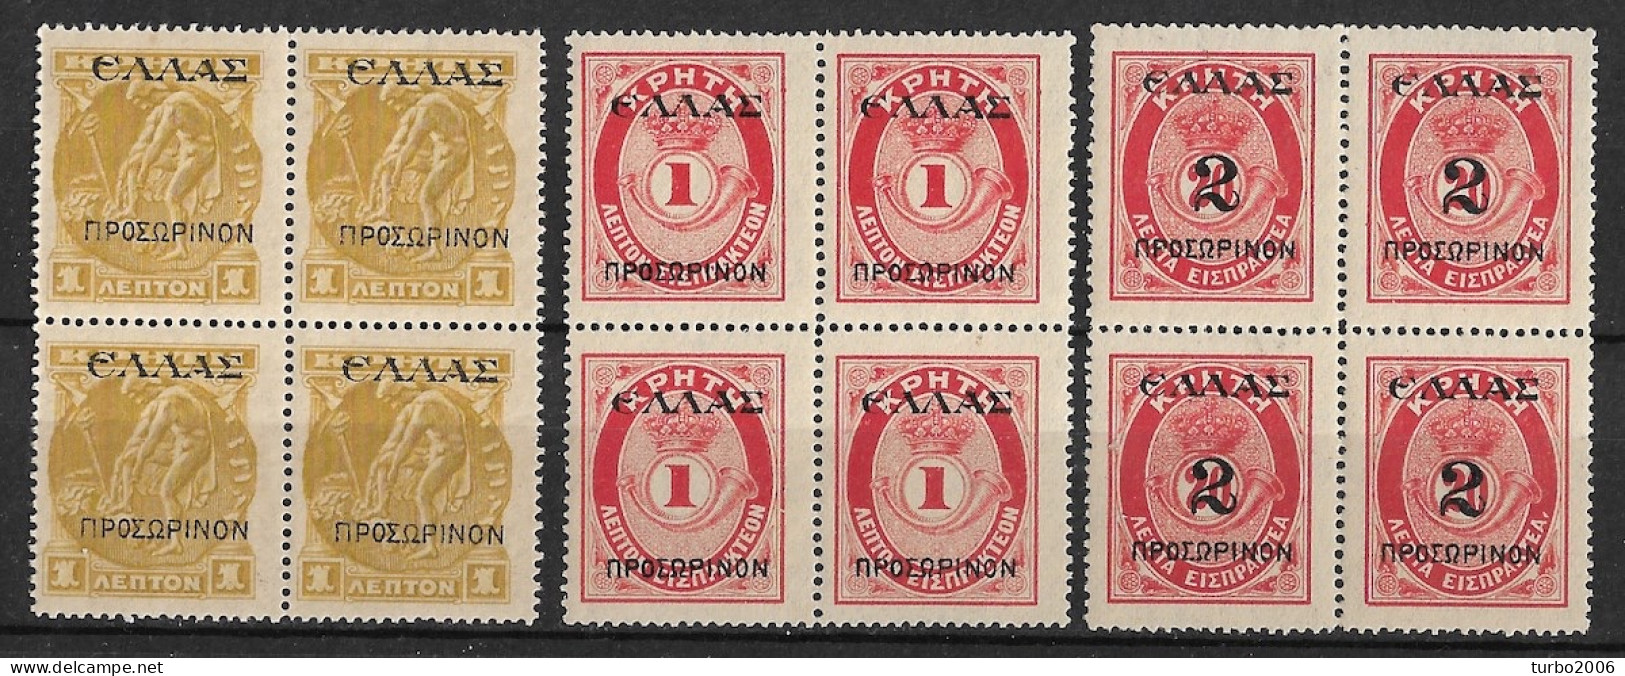 CRETE 1909 Overprinted Stamps With ELLAS + Provisional 3 Values From The Set Vl. 63-64-66 In B4 MH/MNH - Crète